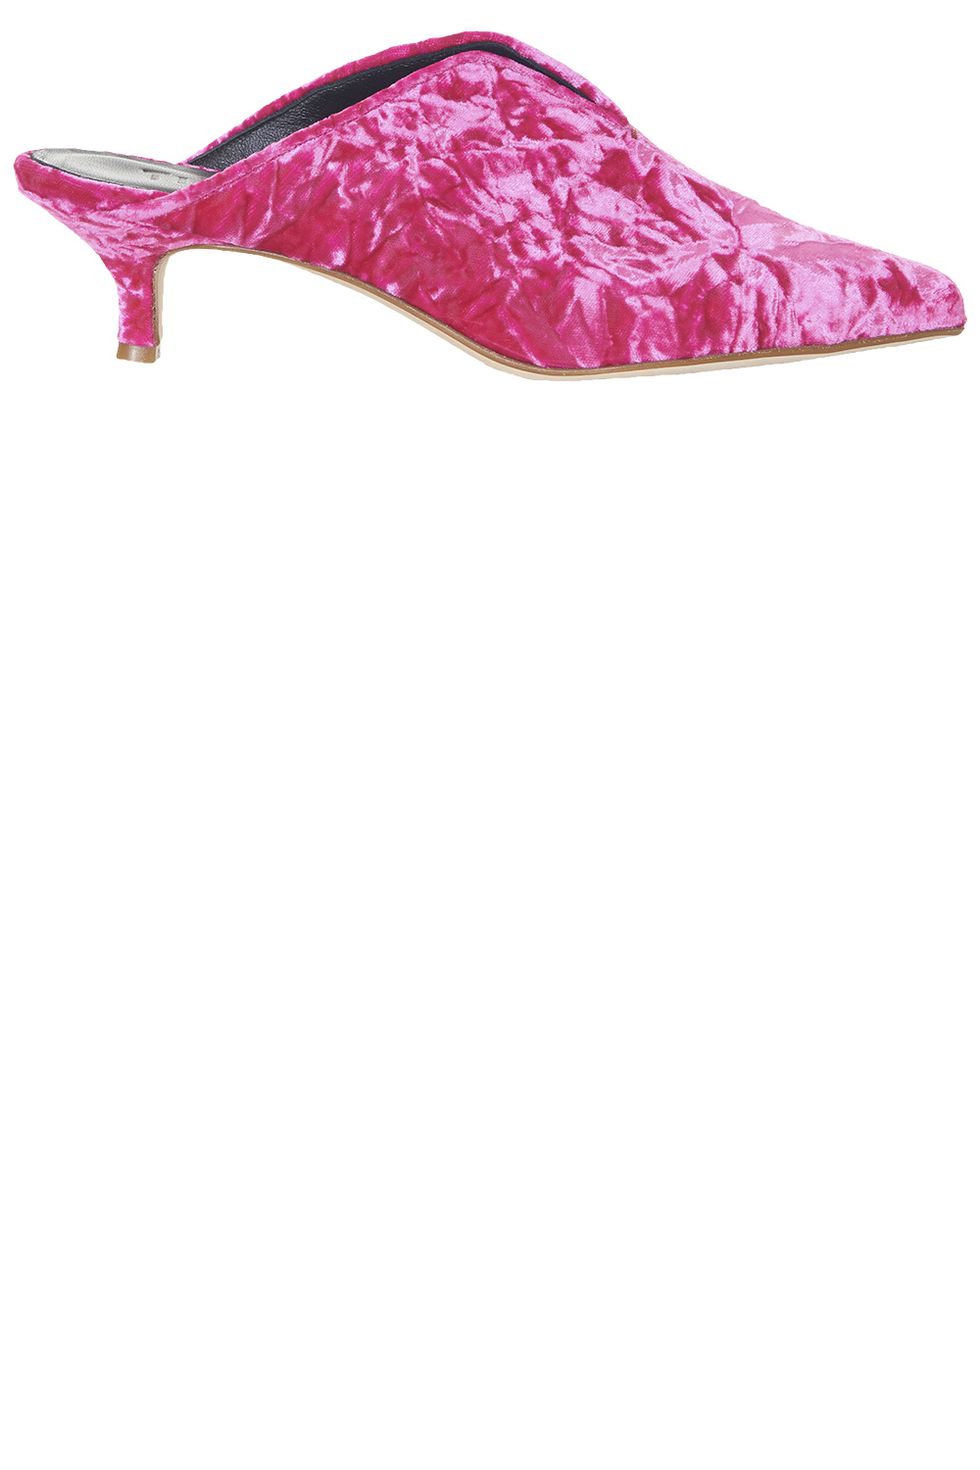 Best Pink Accessories - Hot Pink Bags and Shoes